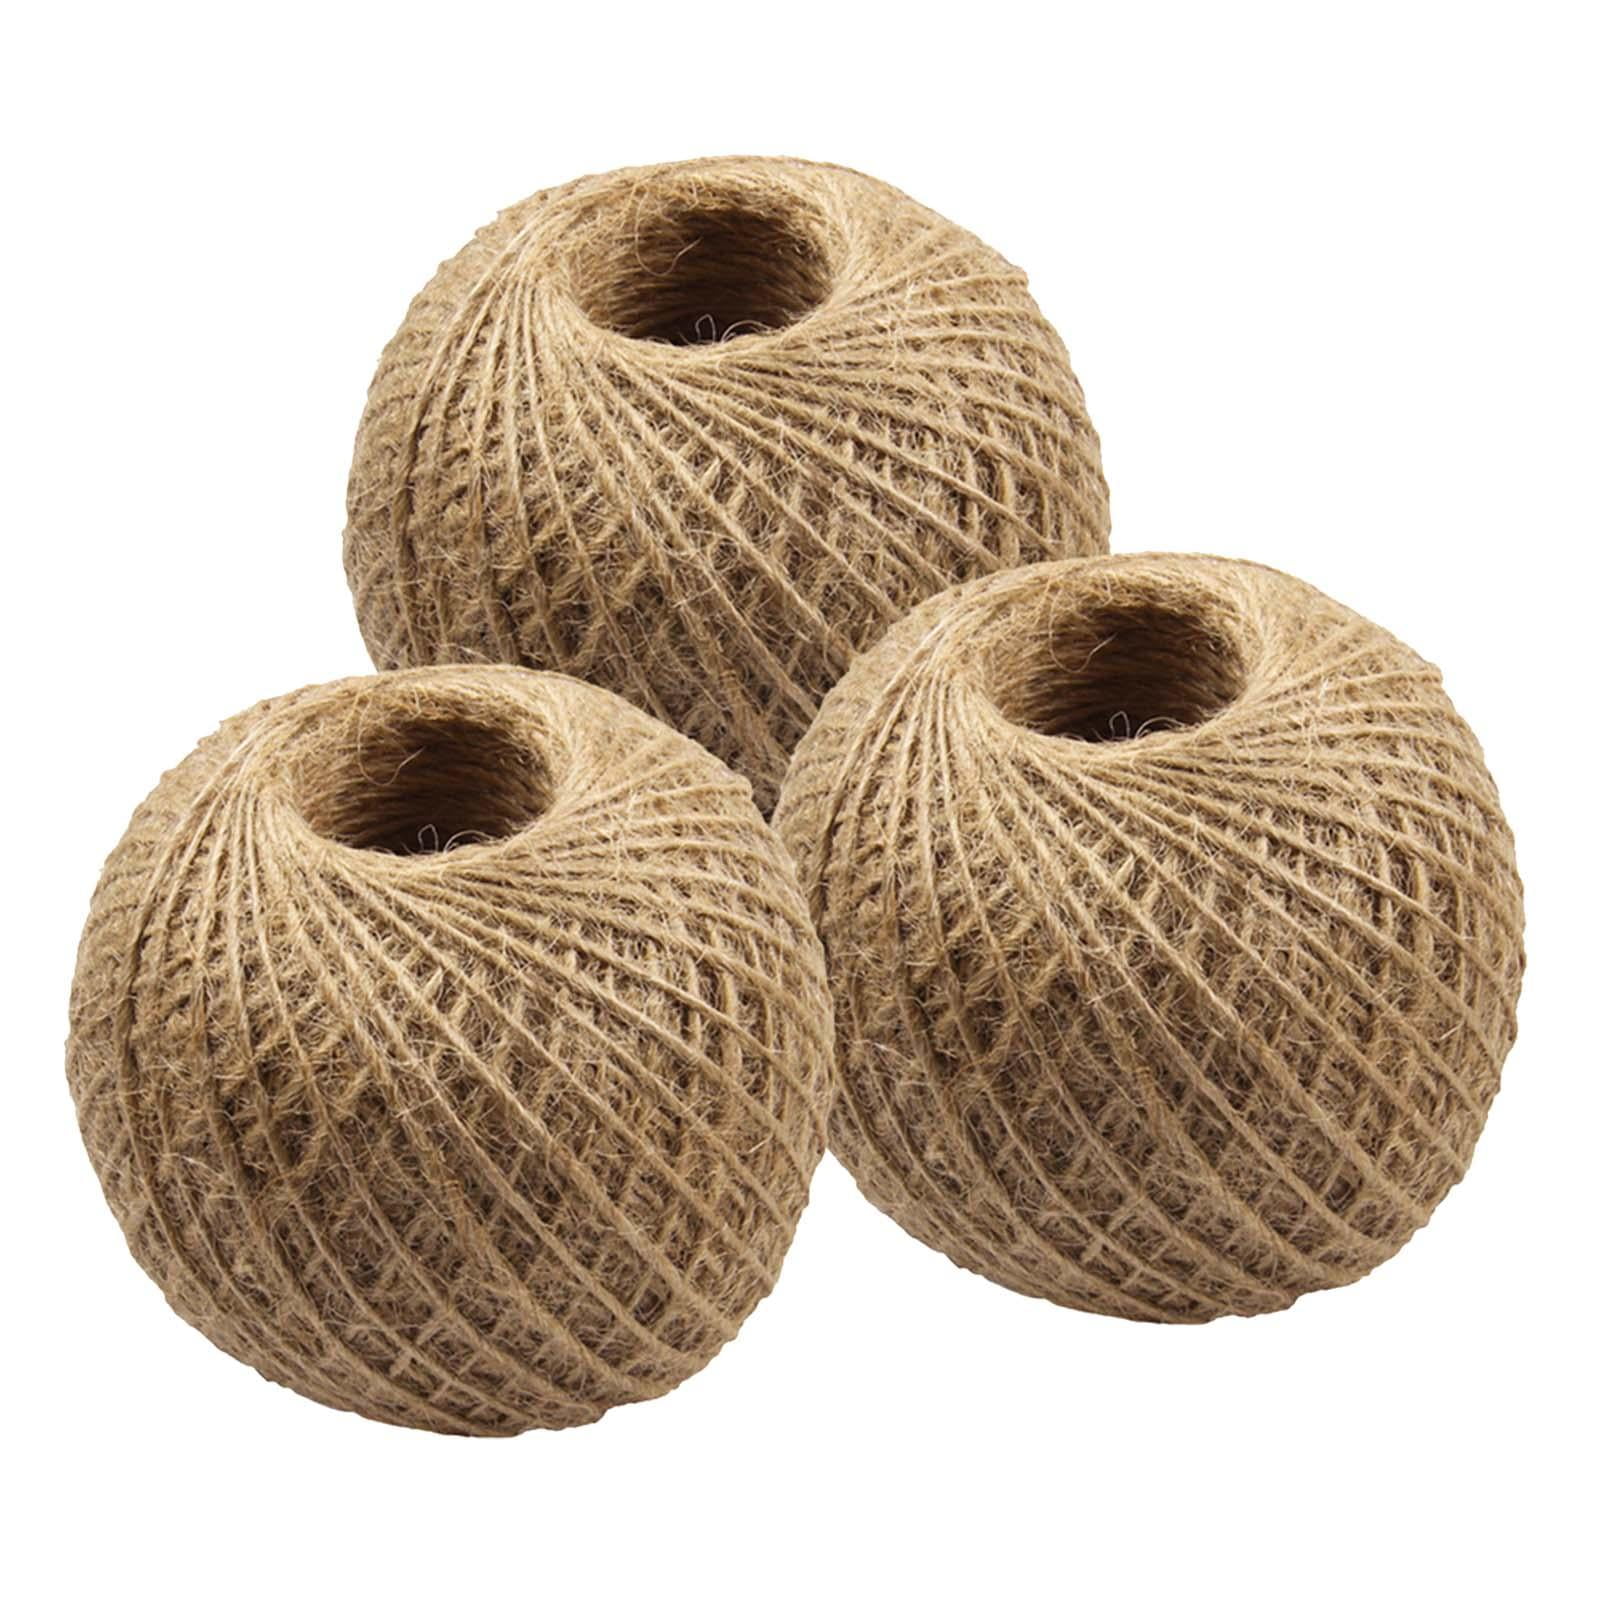 Tenn Well 1500 Feet Natural Jute Twine, 1mm Thin Brown Twine String for  Crafts, Crocheting, Gift Wrapping, Gardening and Christmas Decorations